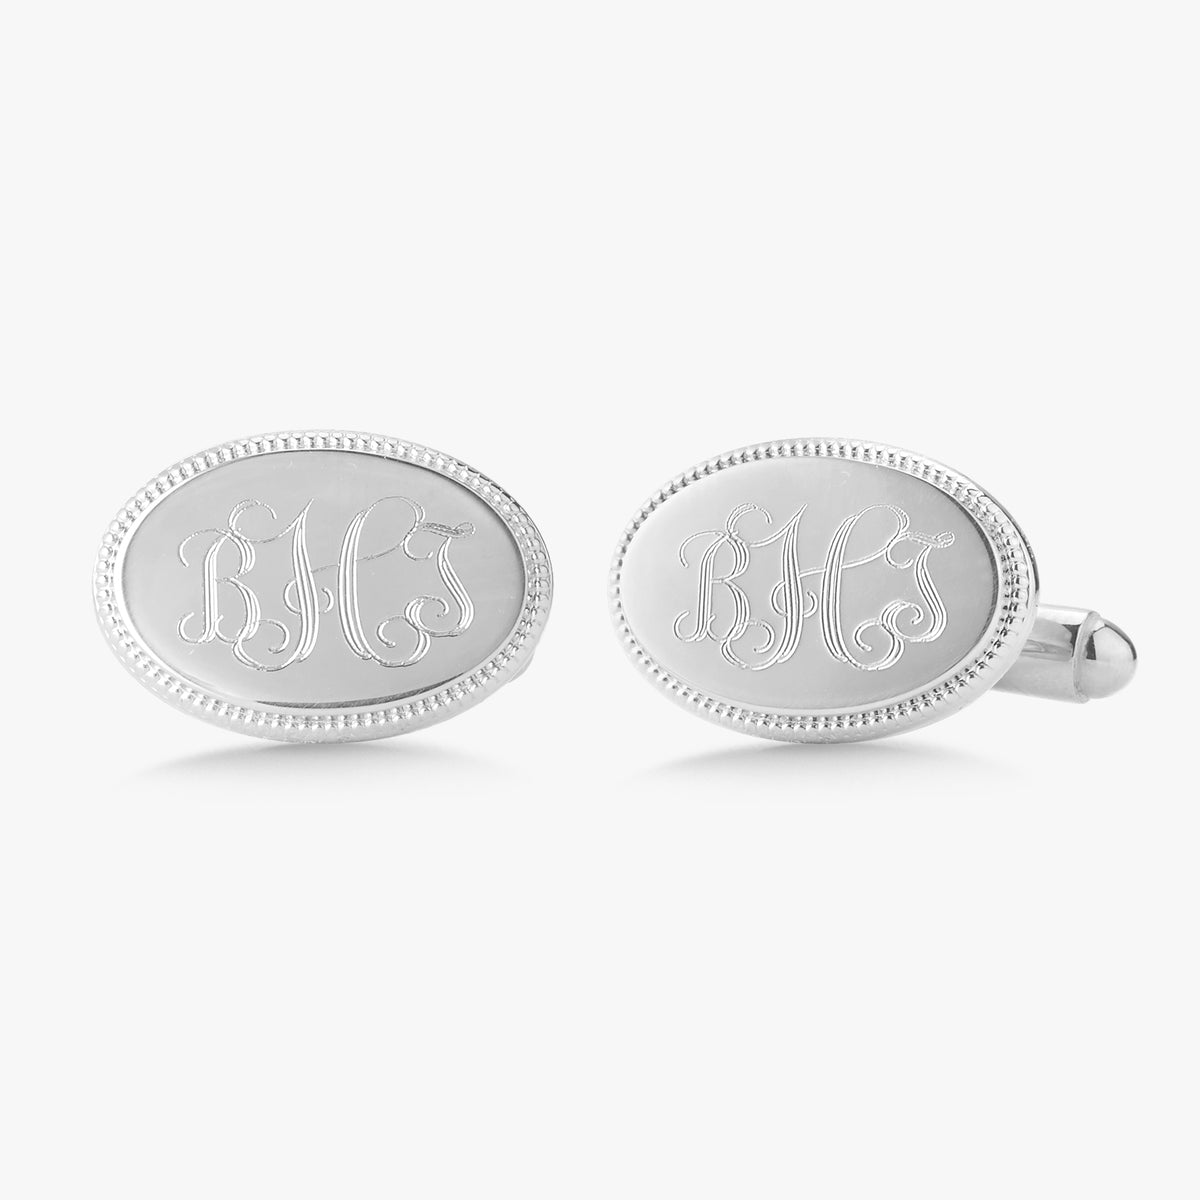 Oval Cuff Links with Beaded Edge